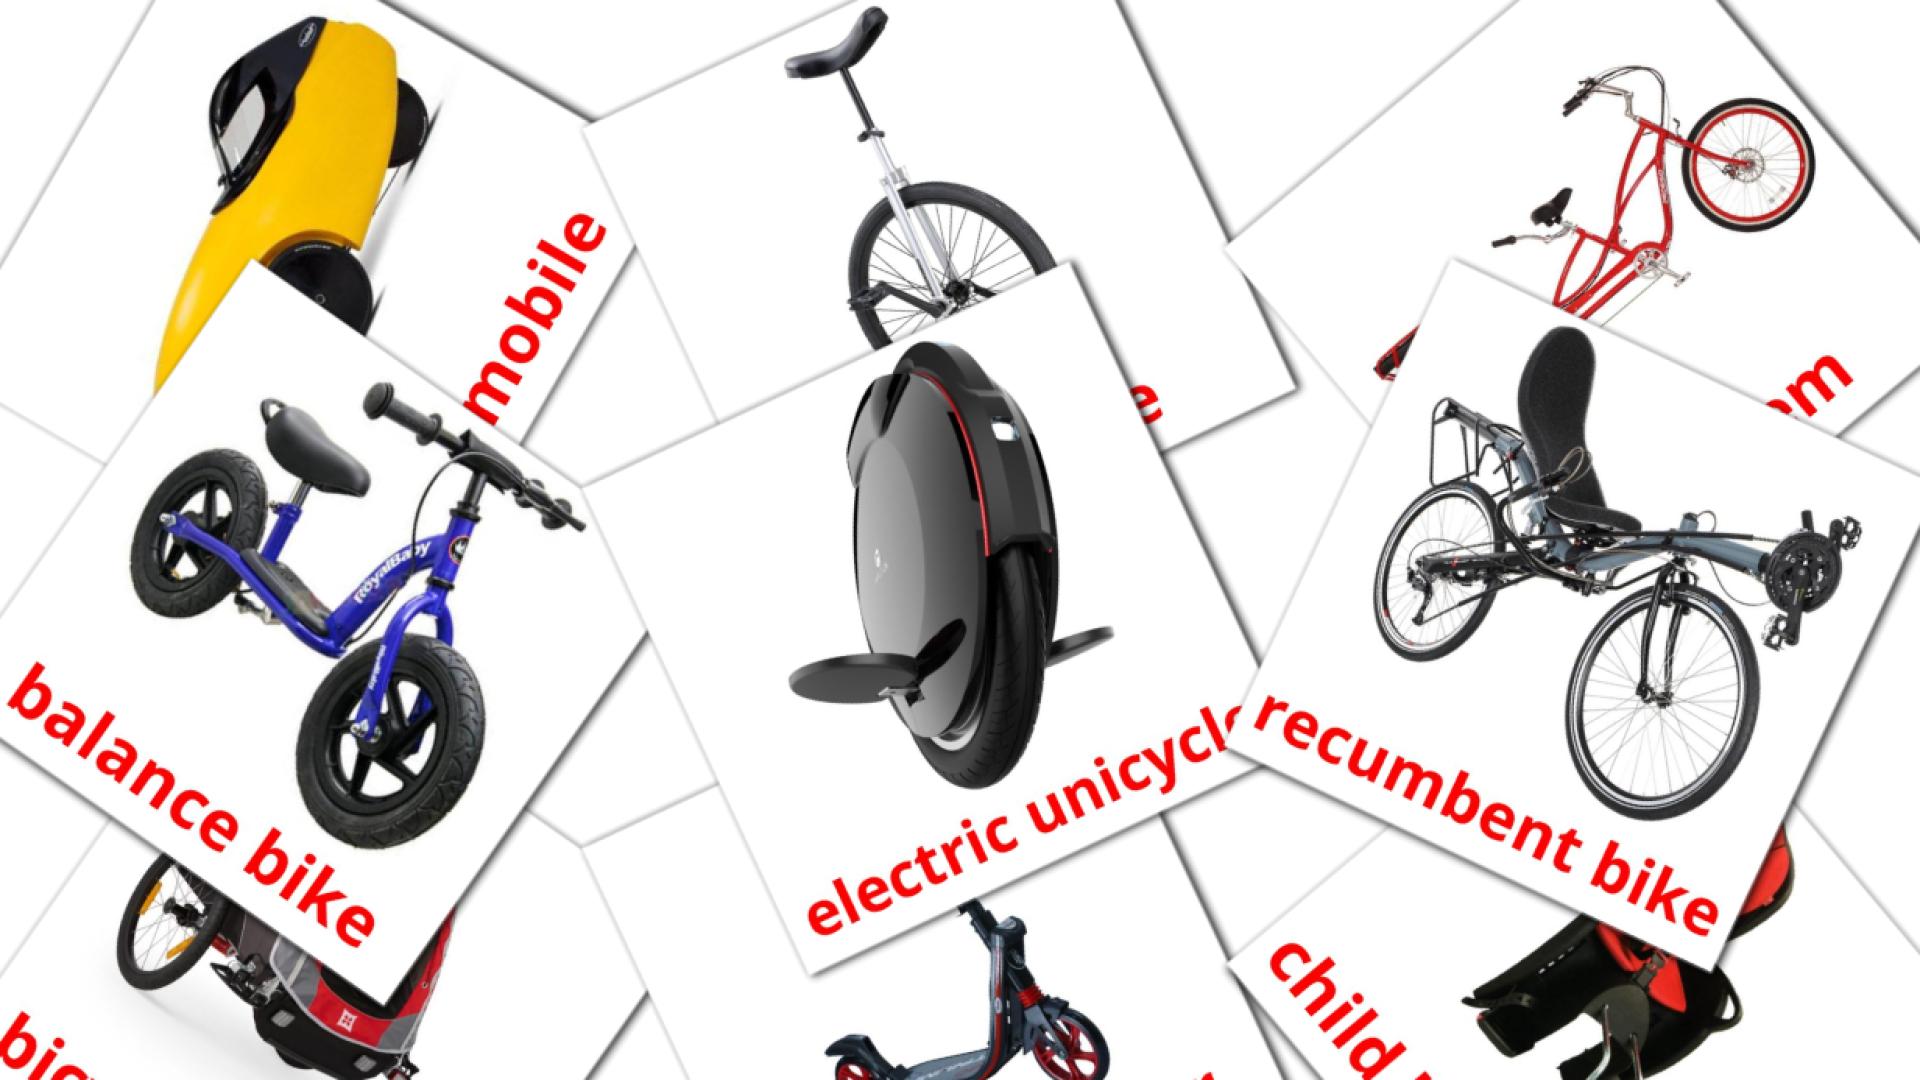 Bicycle transport flashcards